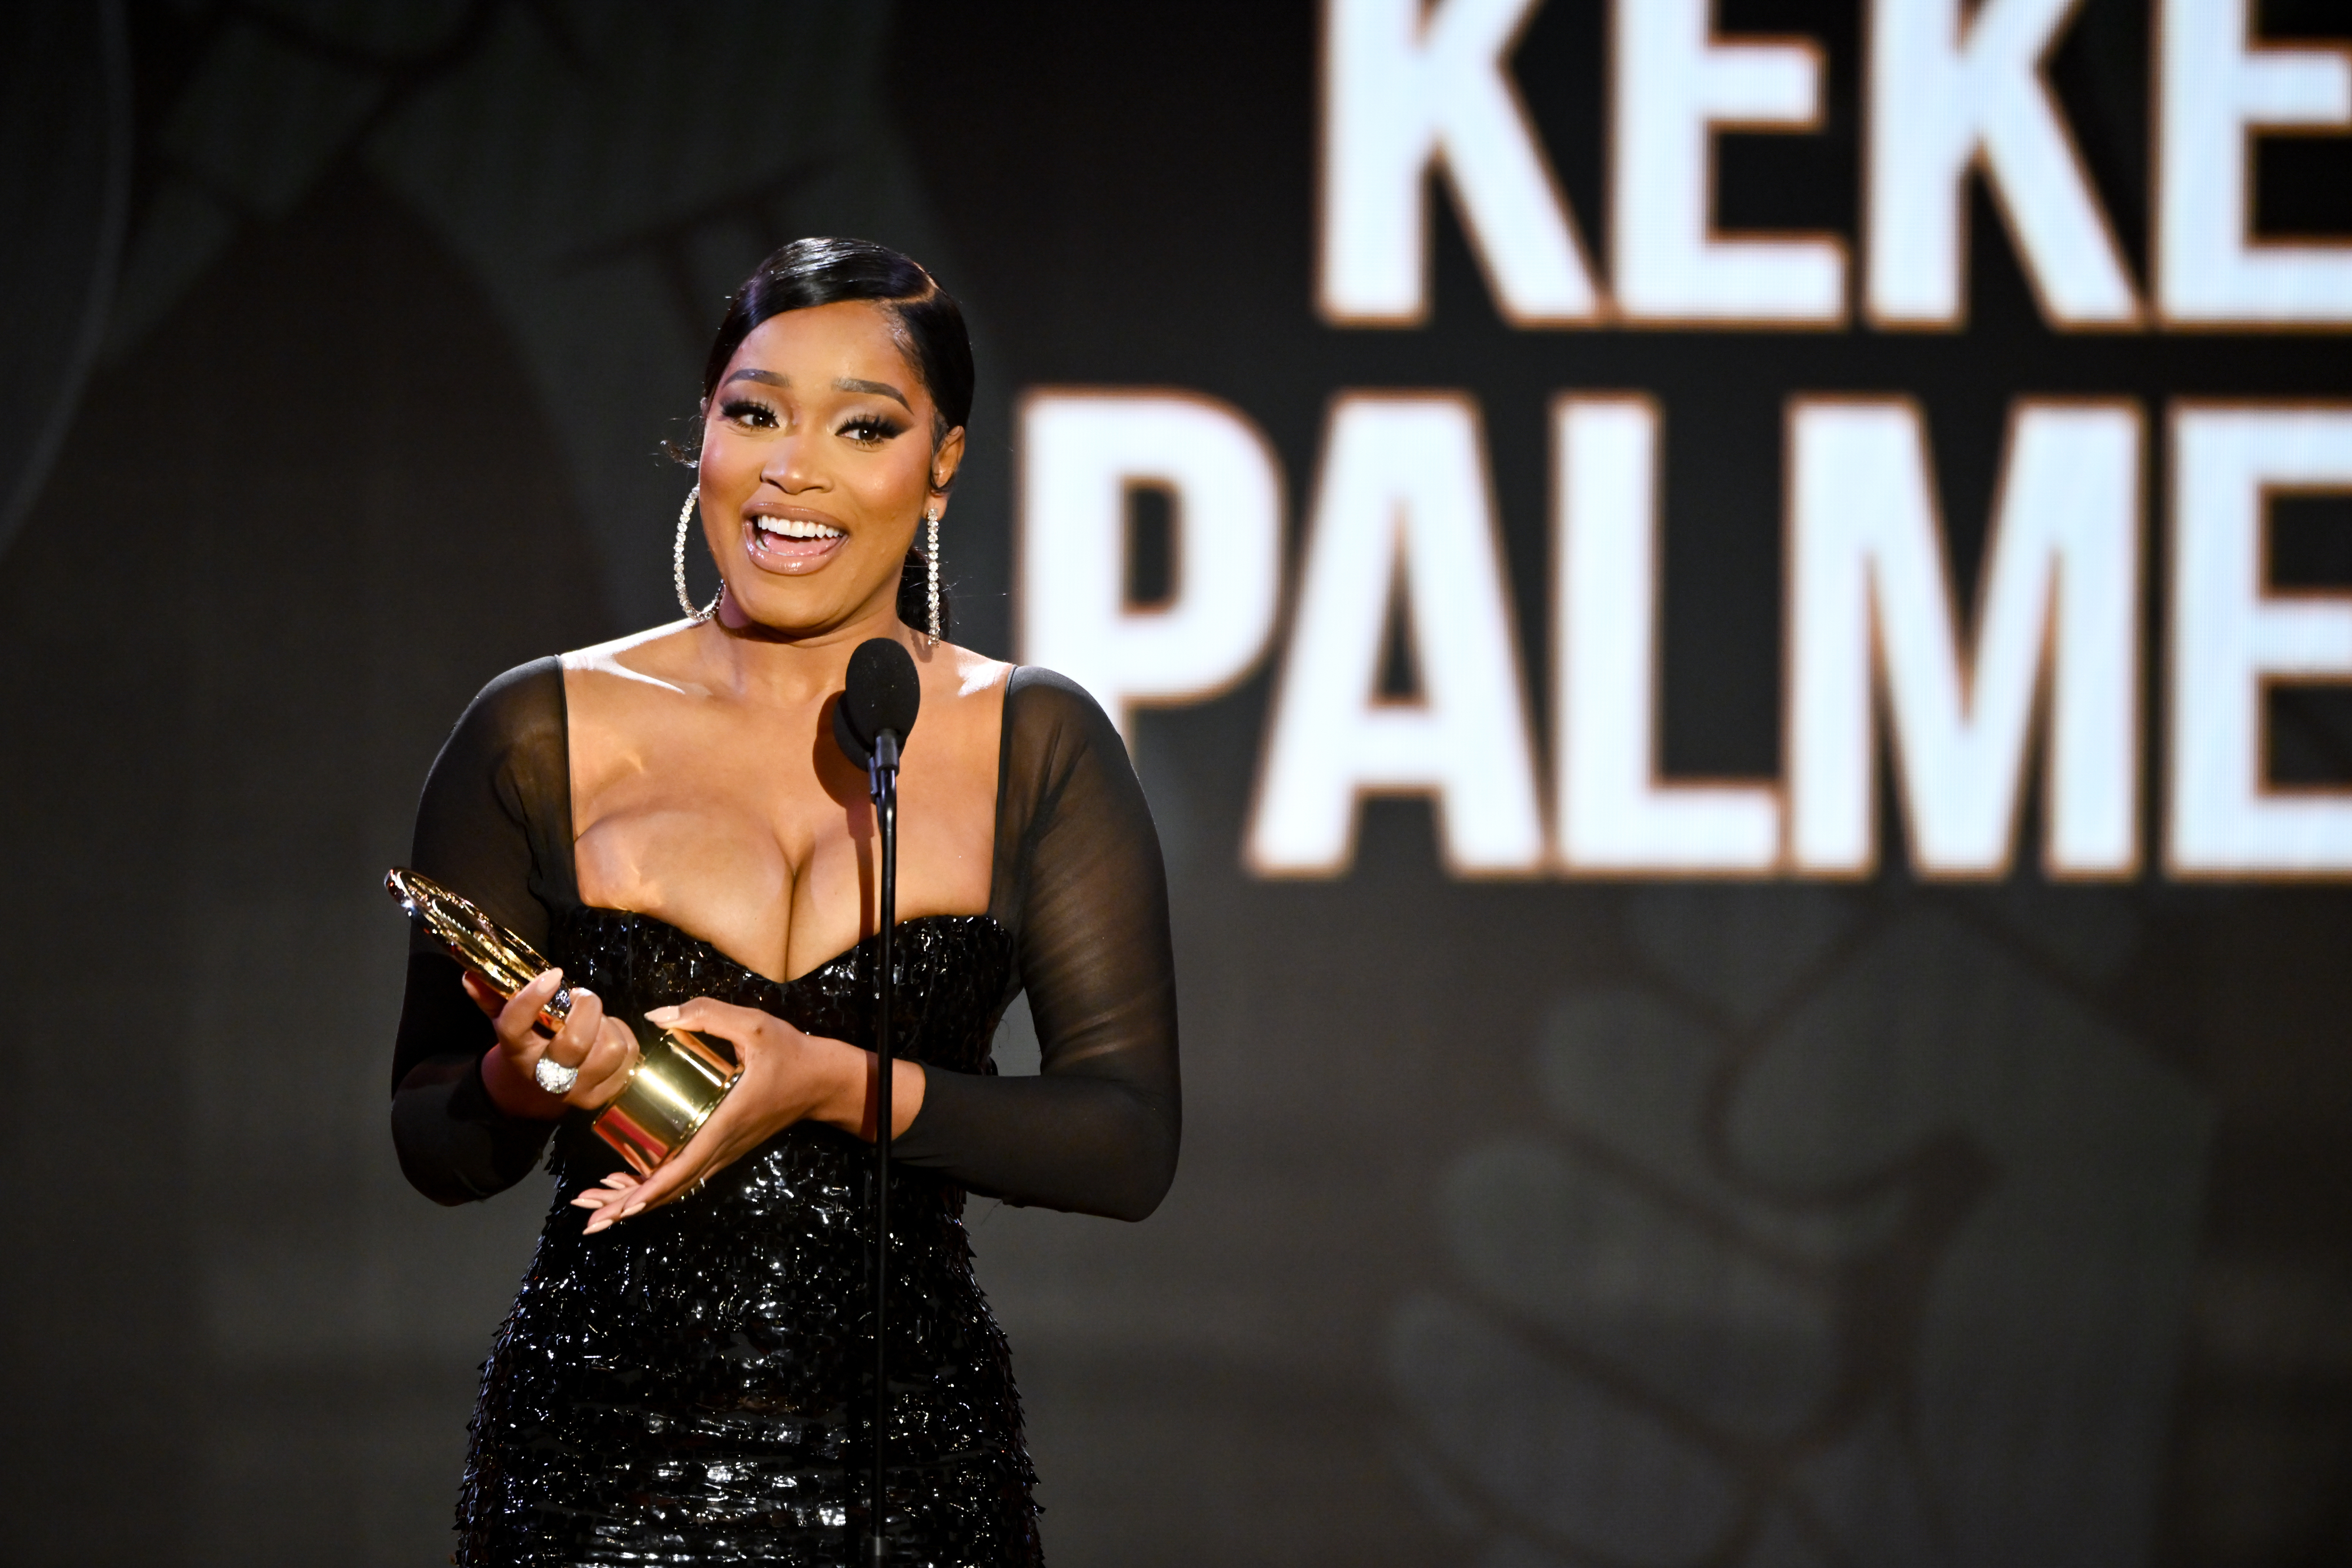 keke accepting an award on stage